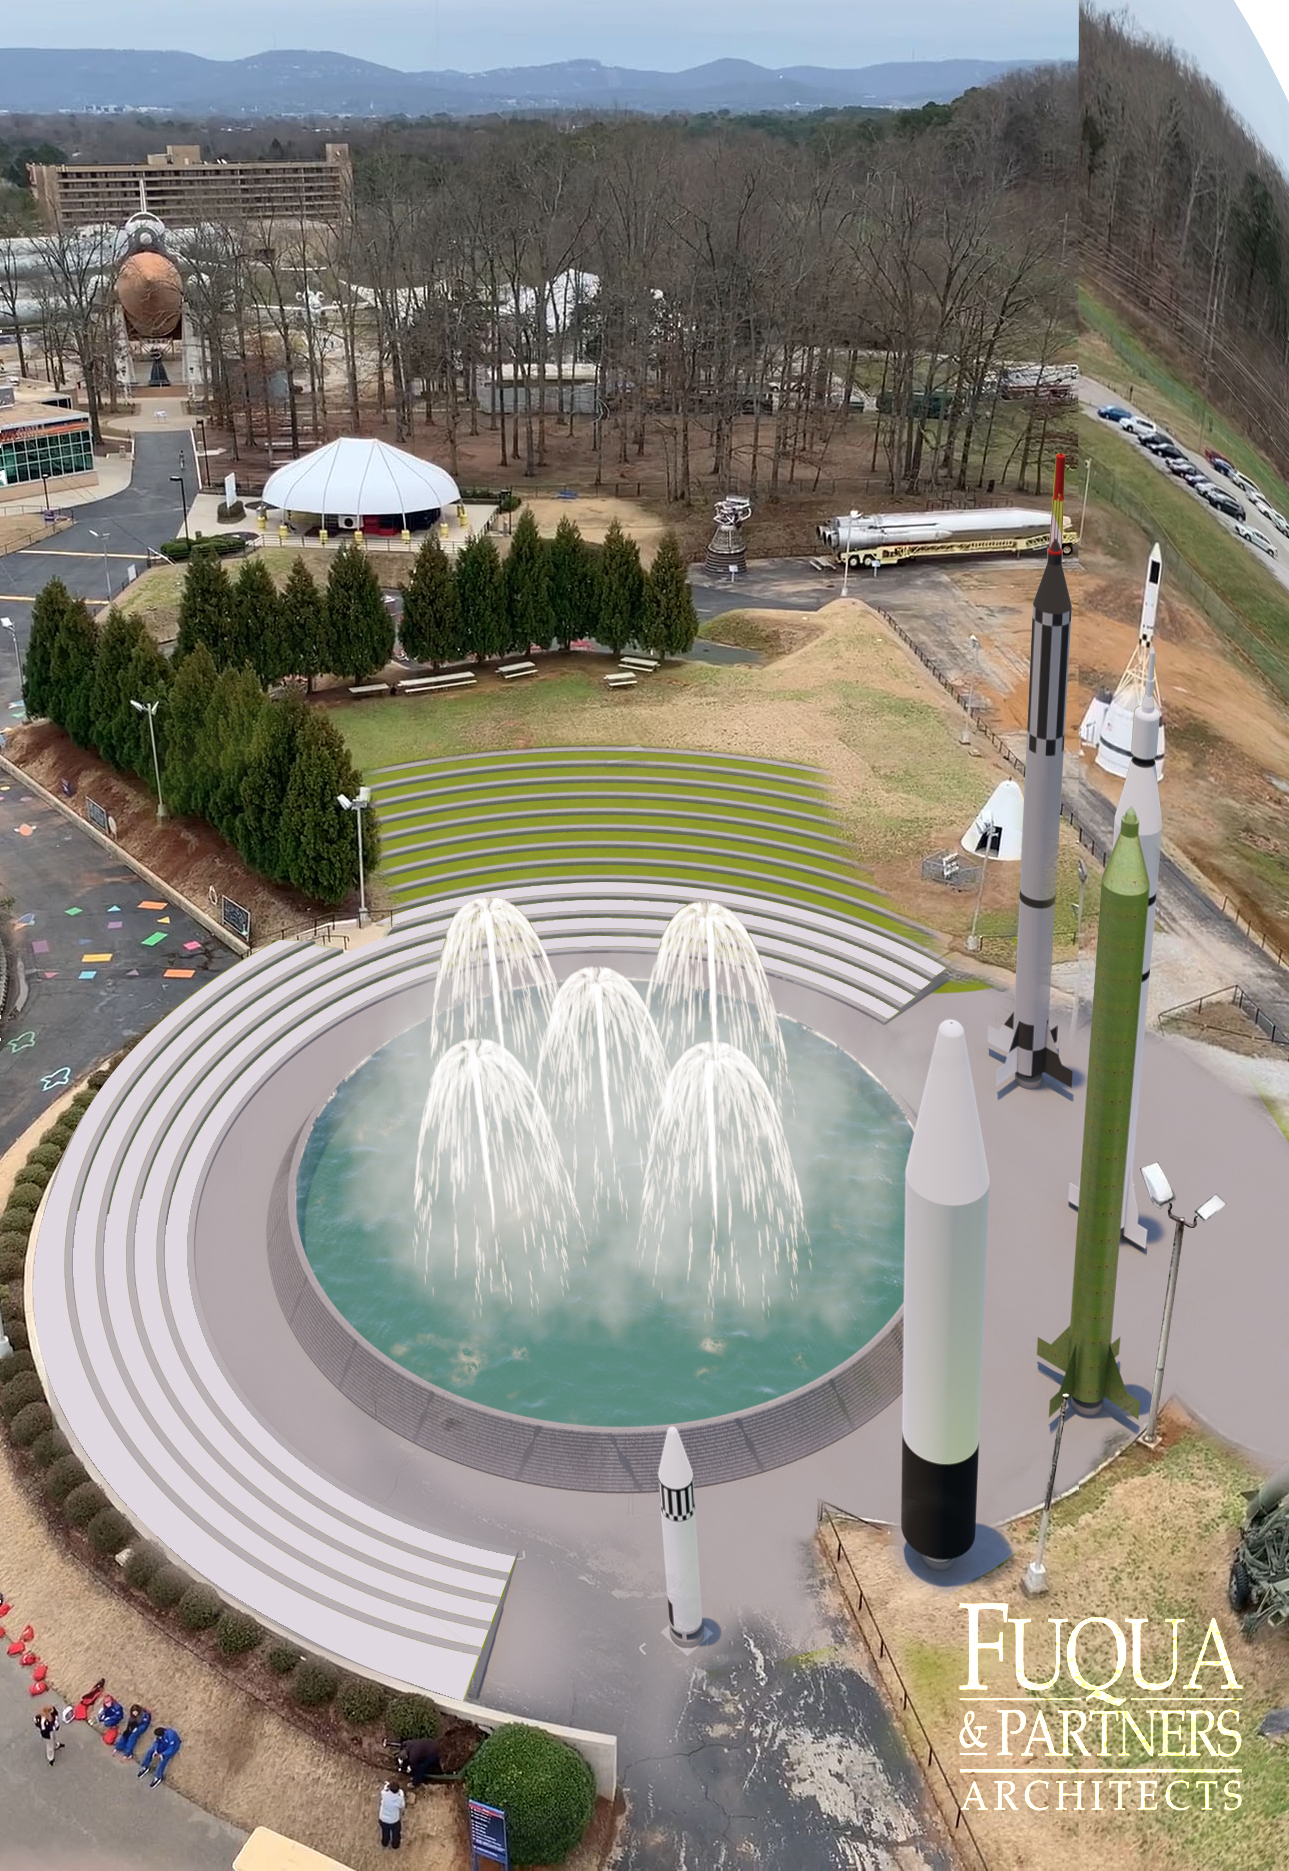 An illustration of the proposed Space Exploration Memorial at the U.S. Space & Rocket Center. 